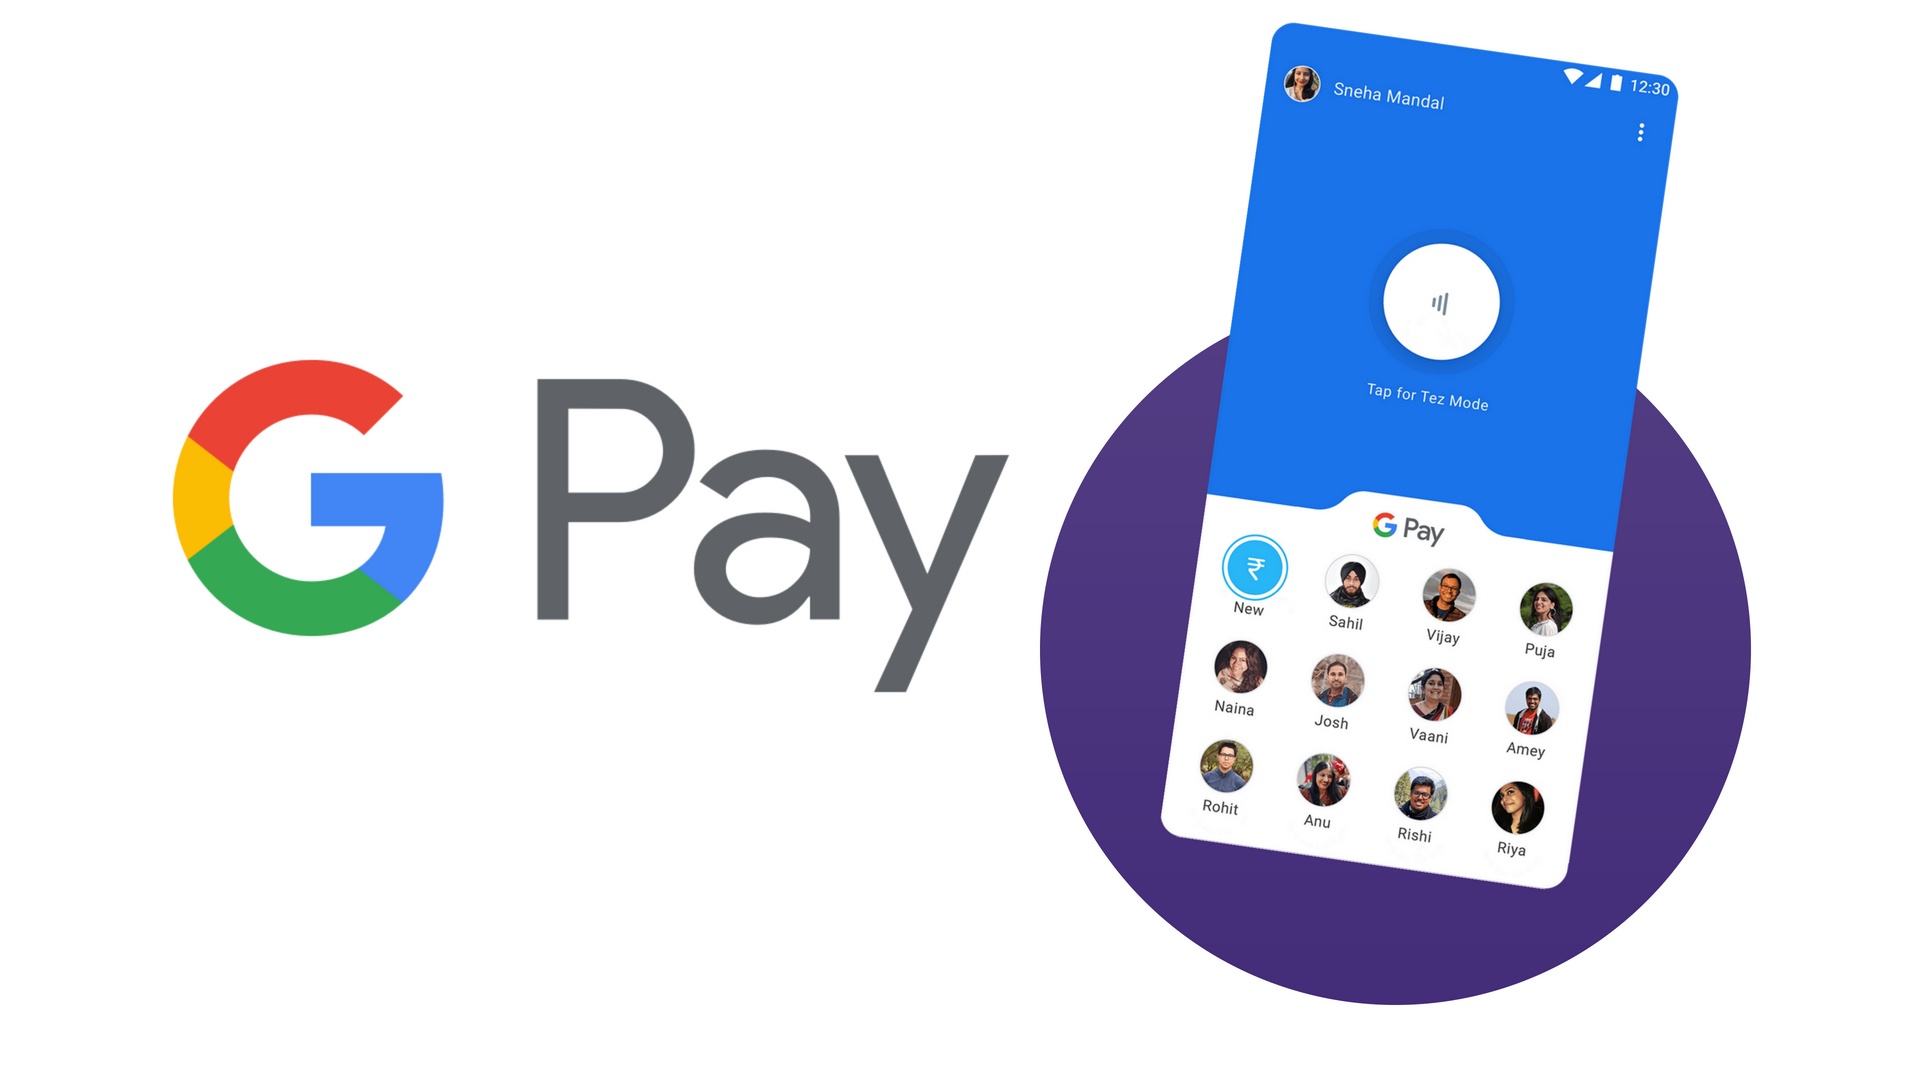 Tez to get rebranded as Google Pay